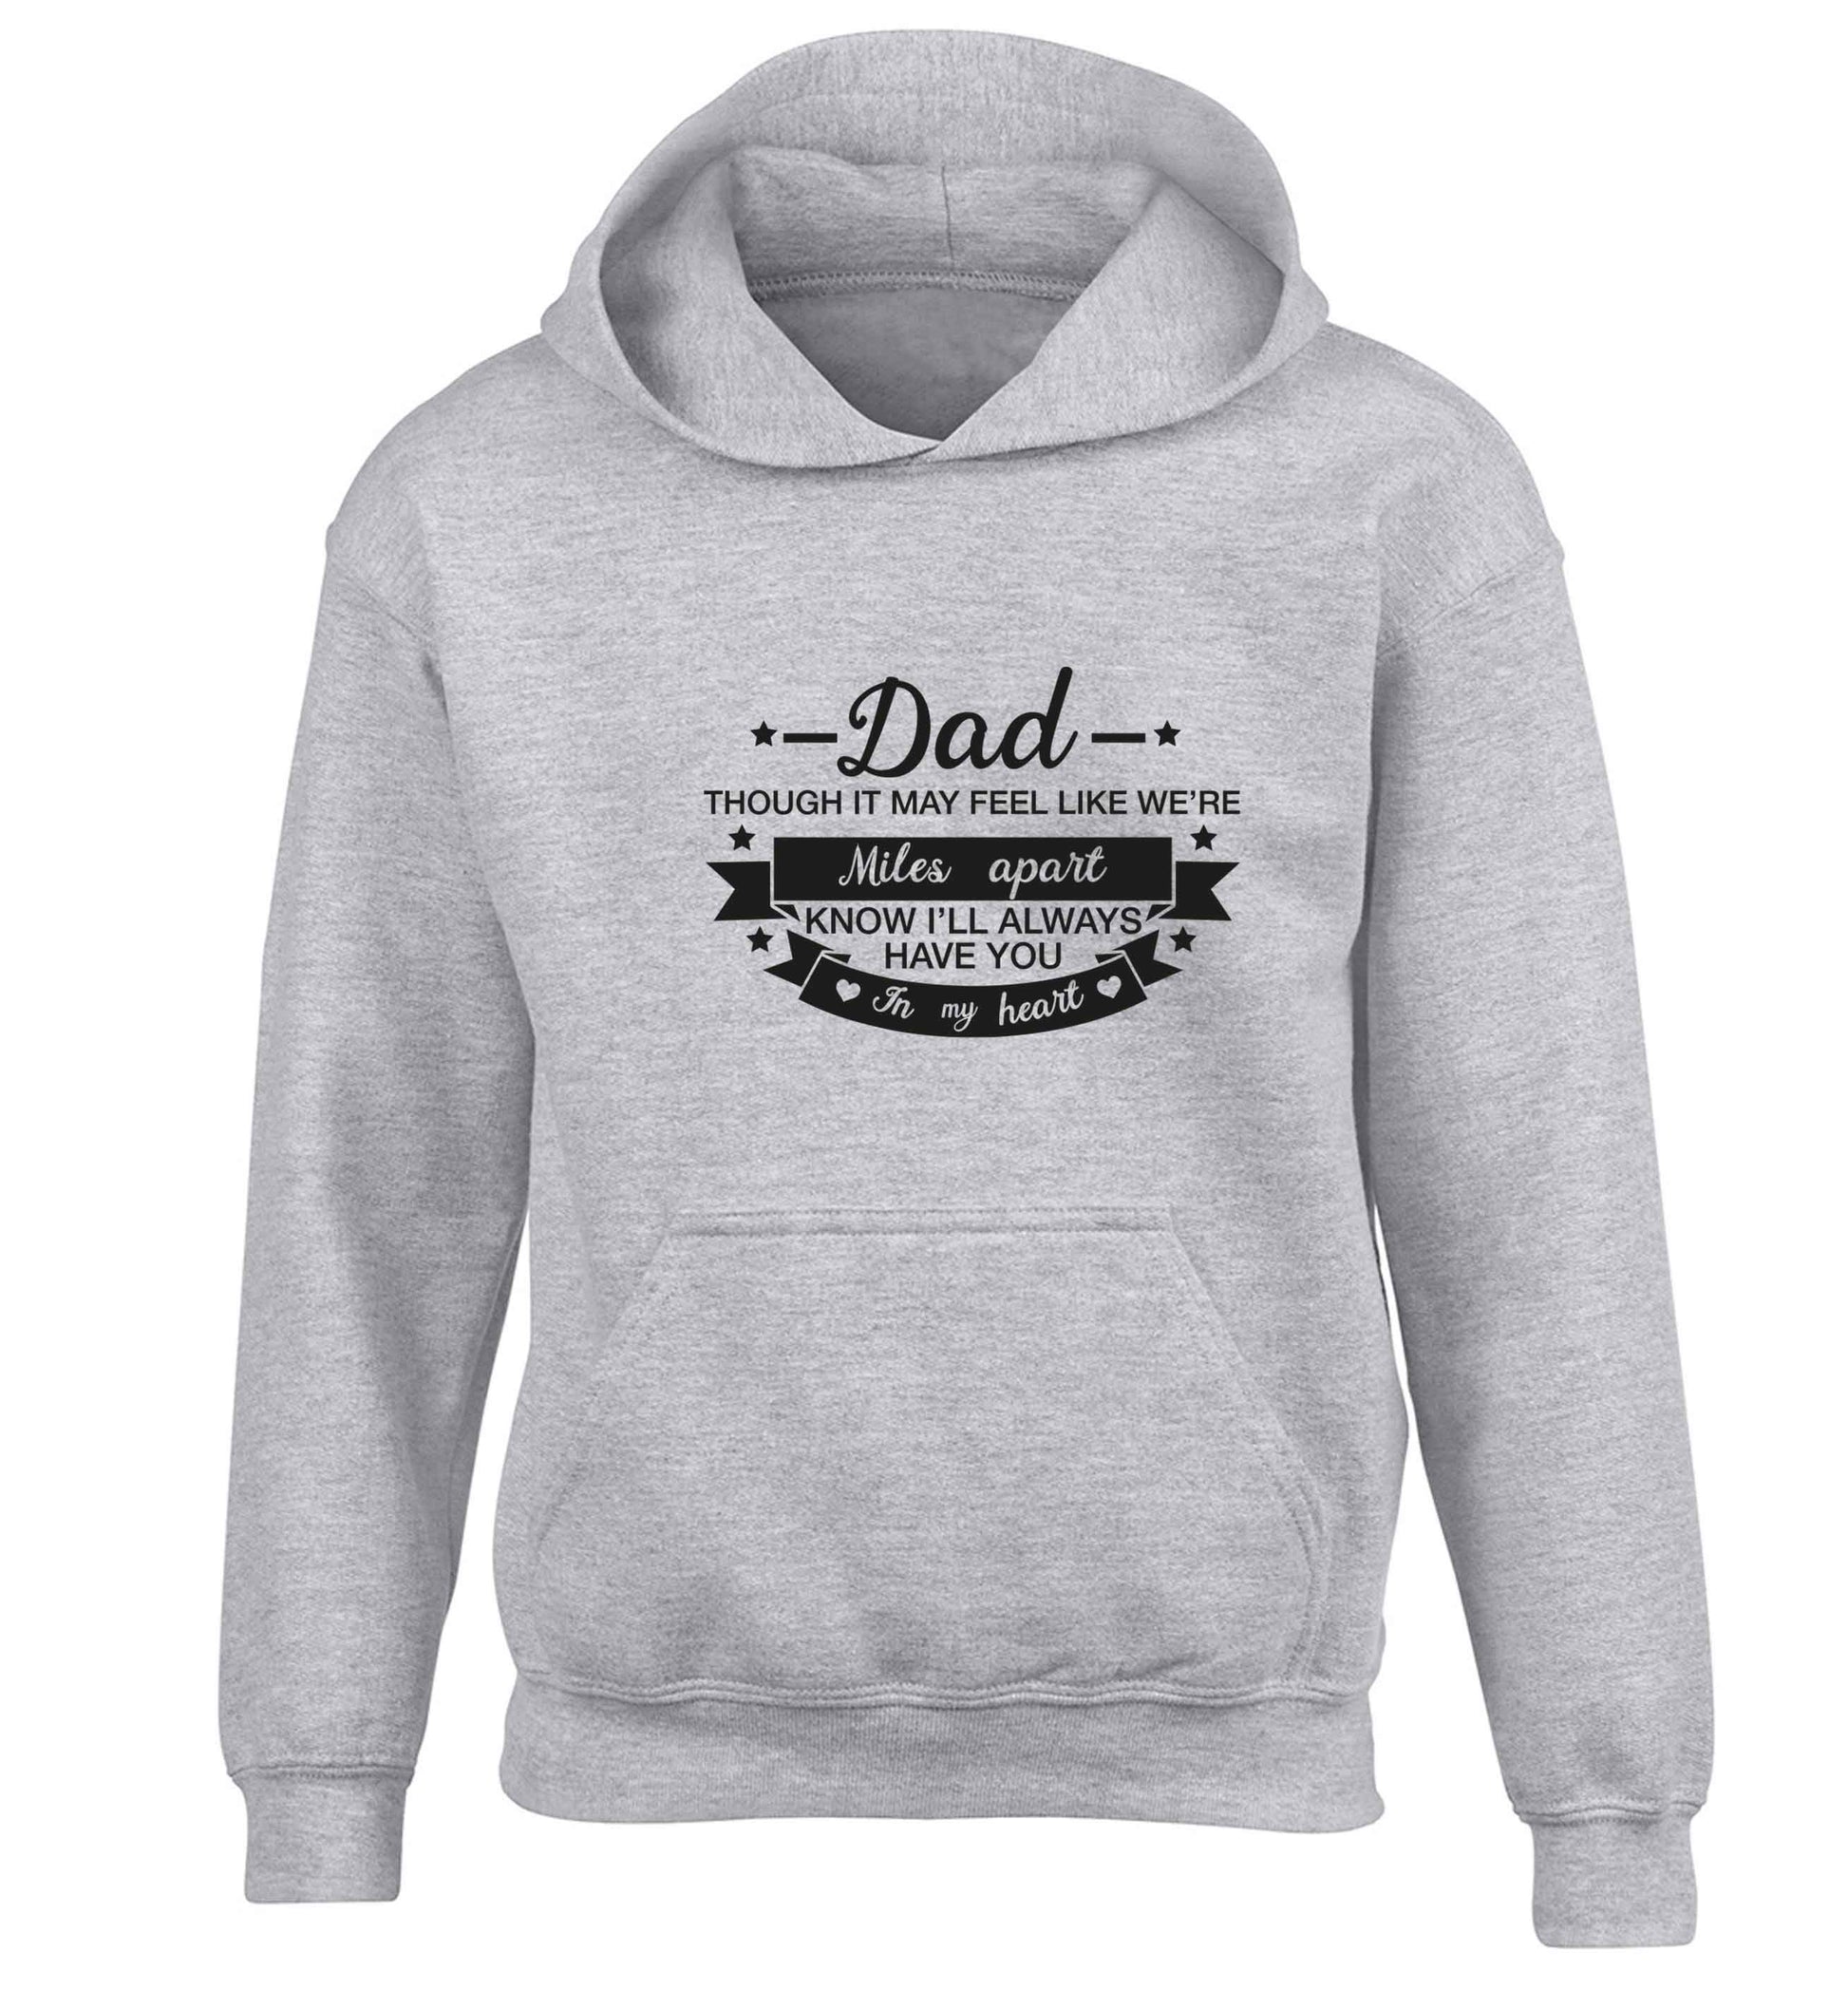 Dad though it may feel like we're miles apart know I'll always have you in my heart children's grey hoodie 12-13 Years